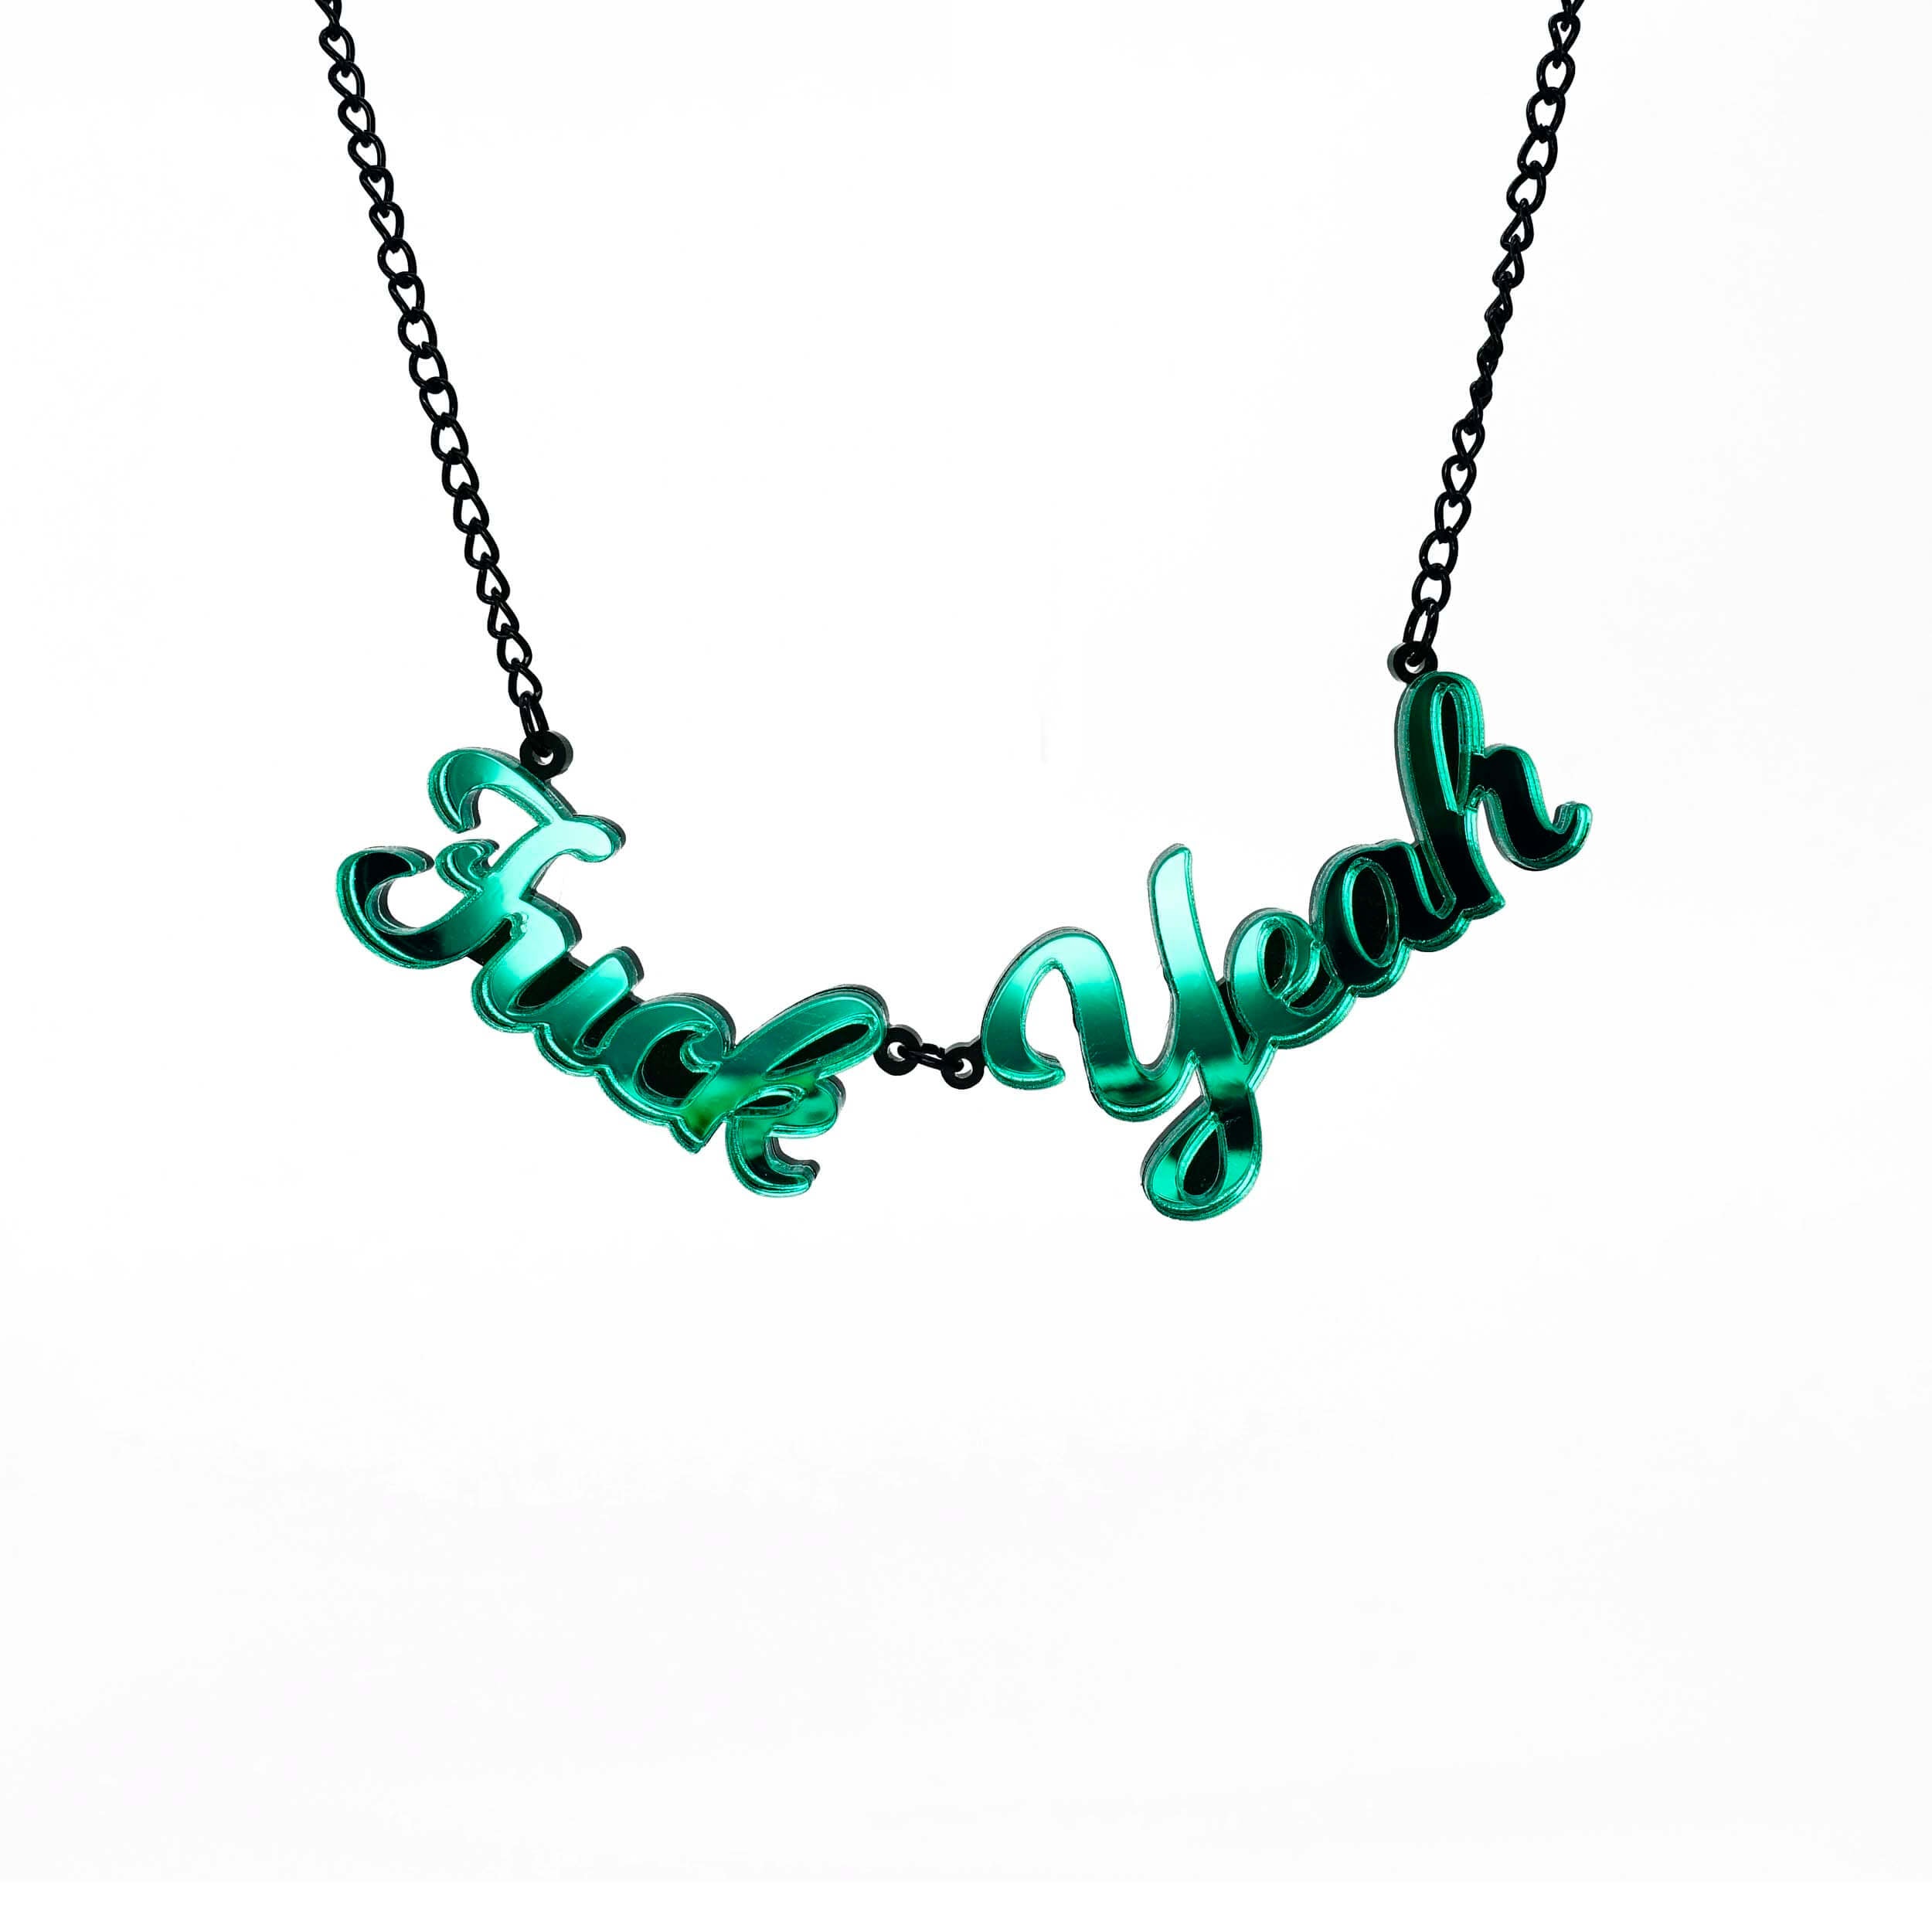 Electric green mirror F*ck Yeah necklace shown hanging on white. Designed by Sarah Day for Wear and Resist. £2 goes to Bloody Good Period. 